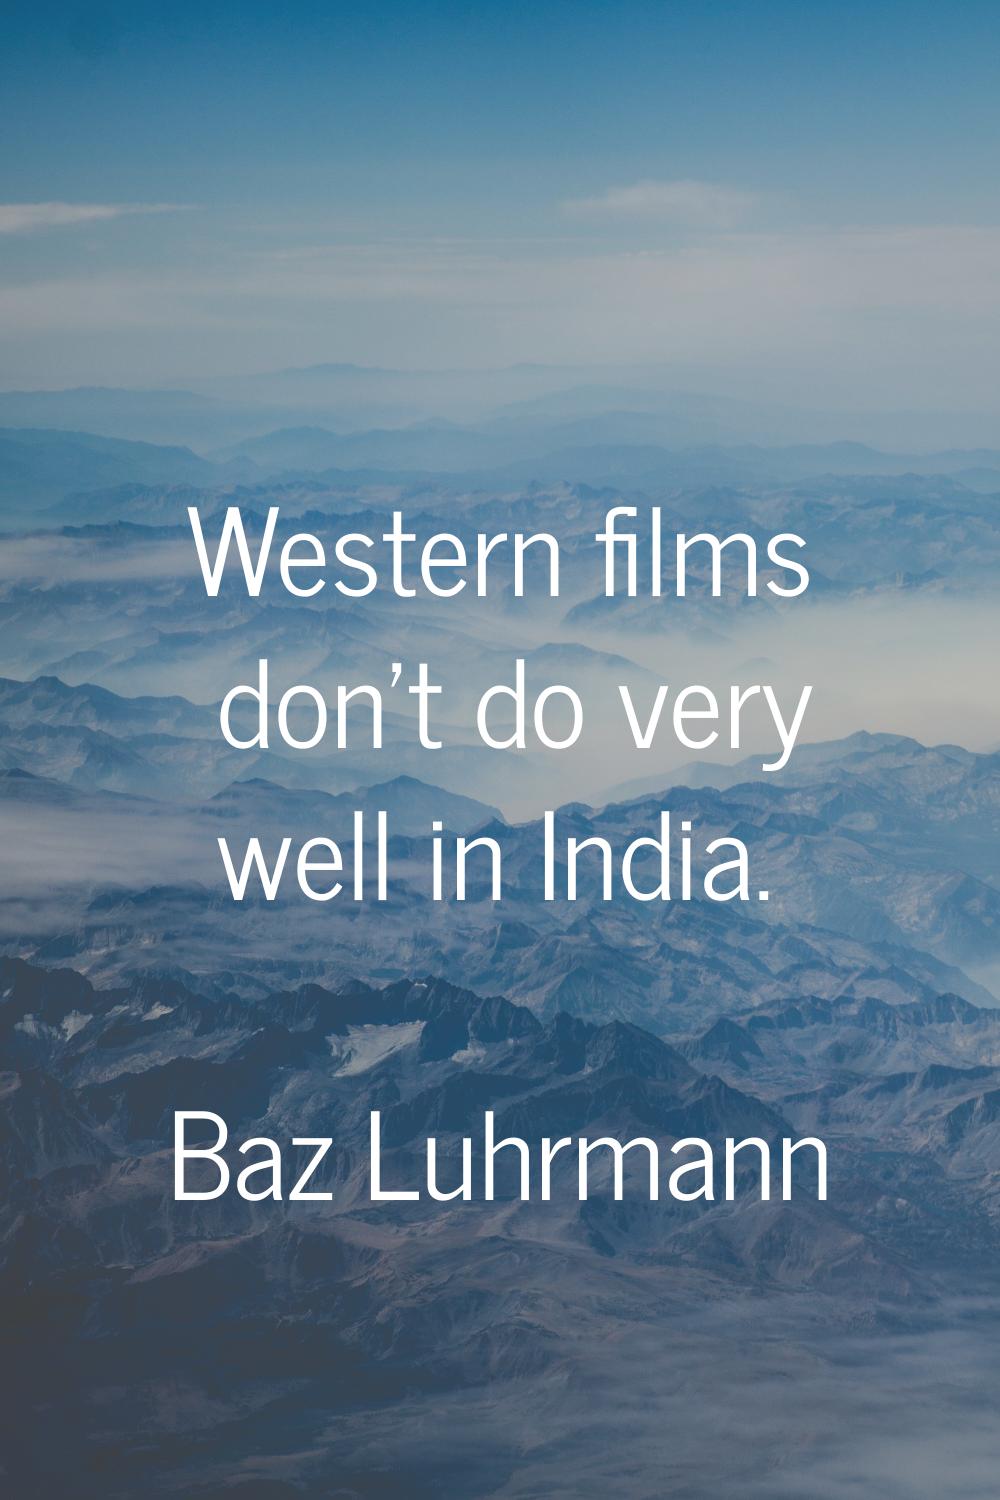 Western films don't do very well in India.